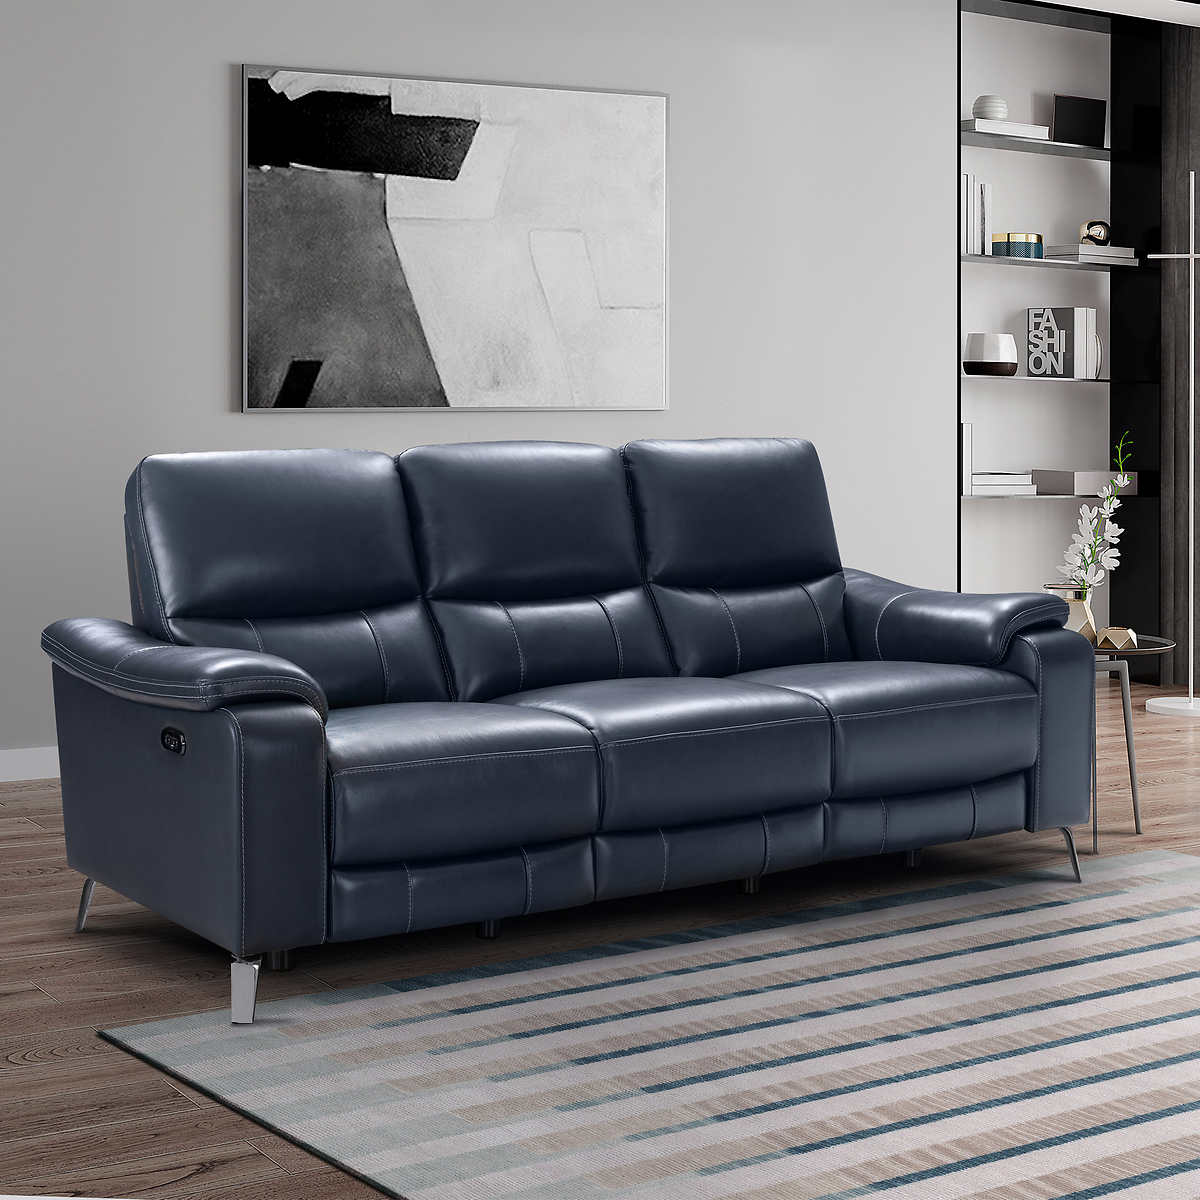 Indigo Bay Leather Power Reclining Sofa, Power Reclining Sectional Leather